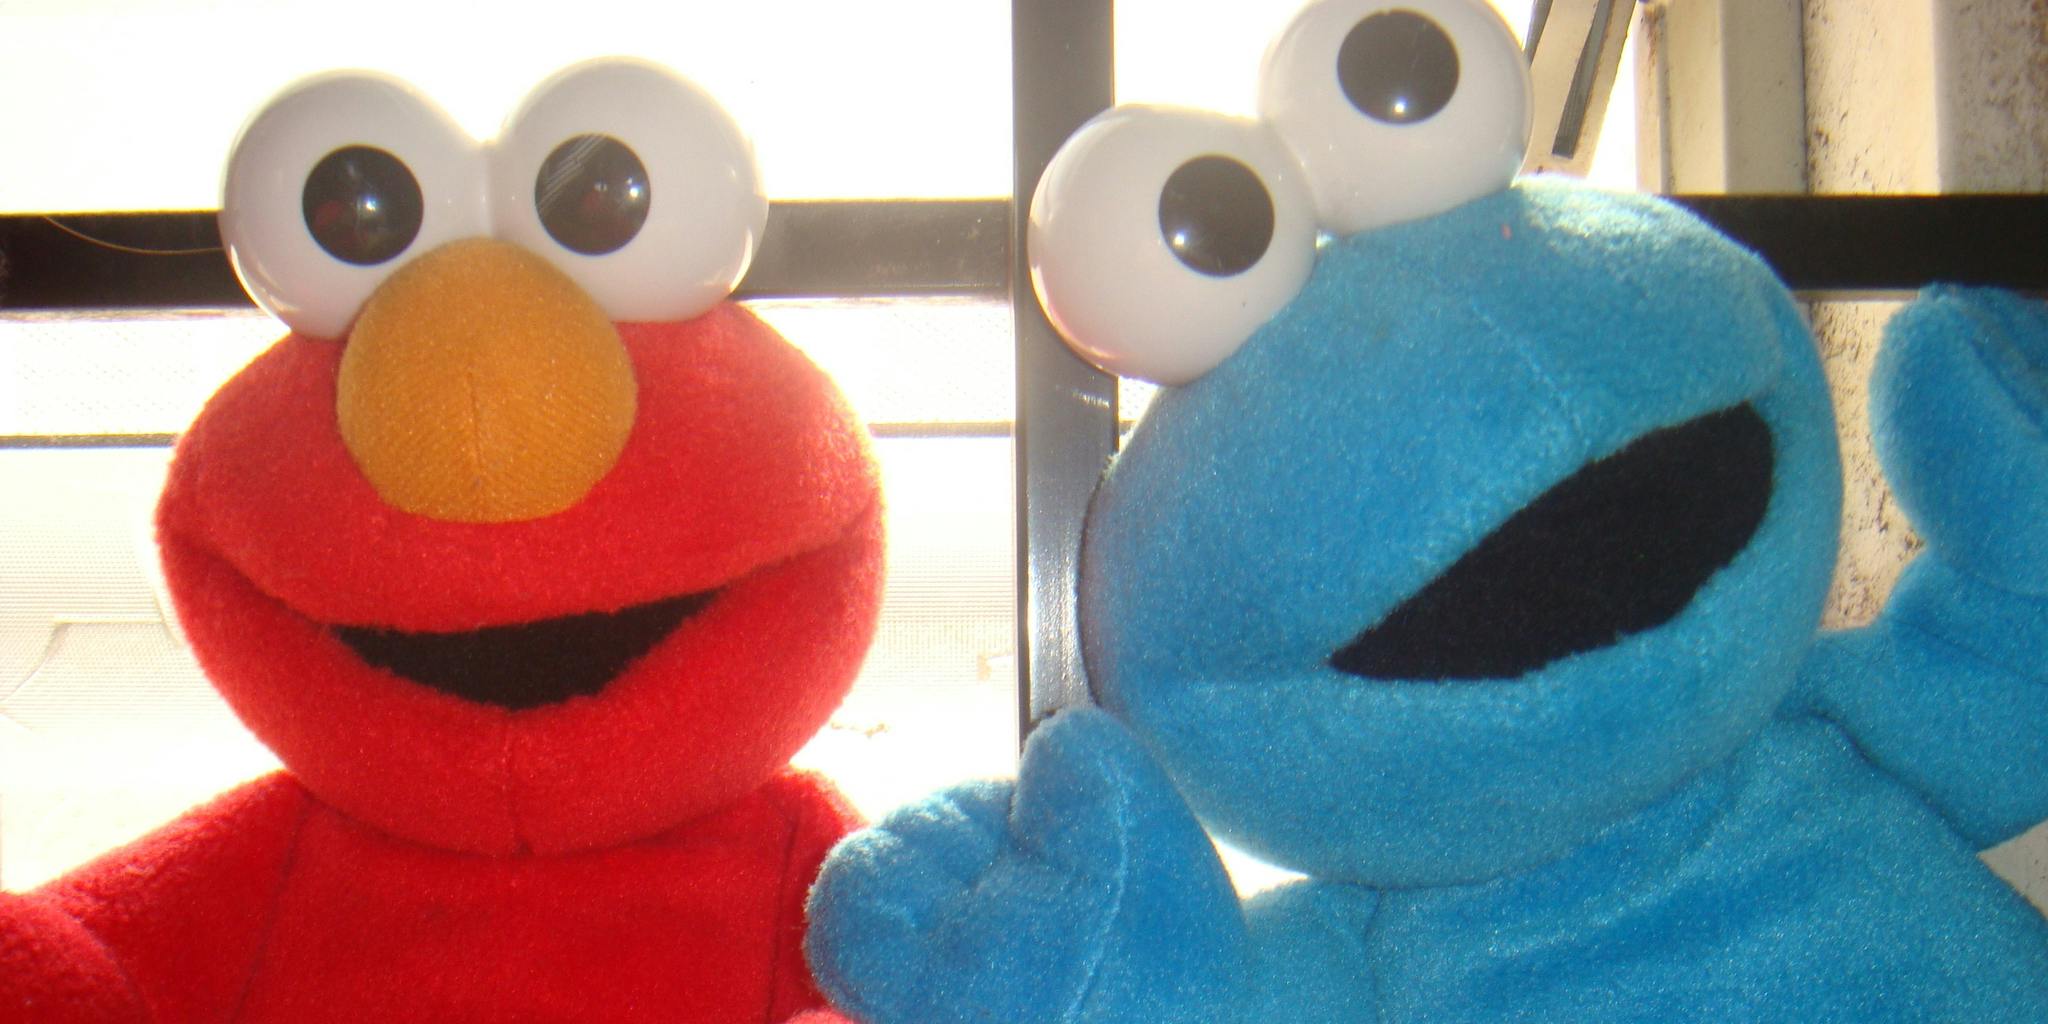 Elmo and Cookie Monster toys have NSFW fun when left in a box together